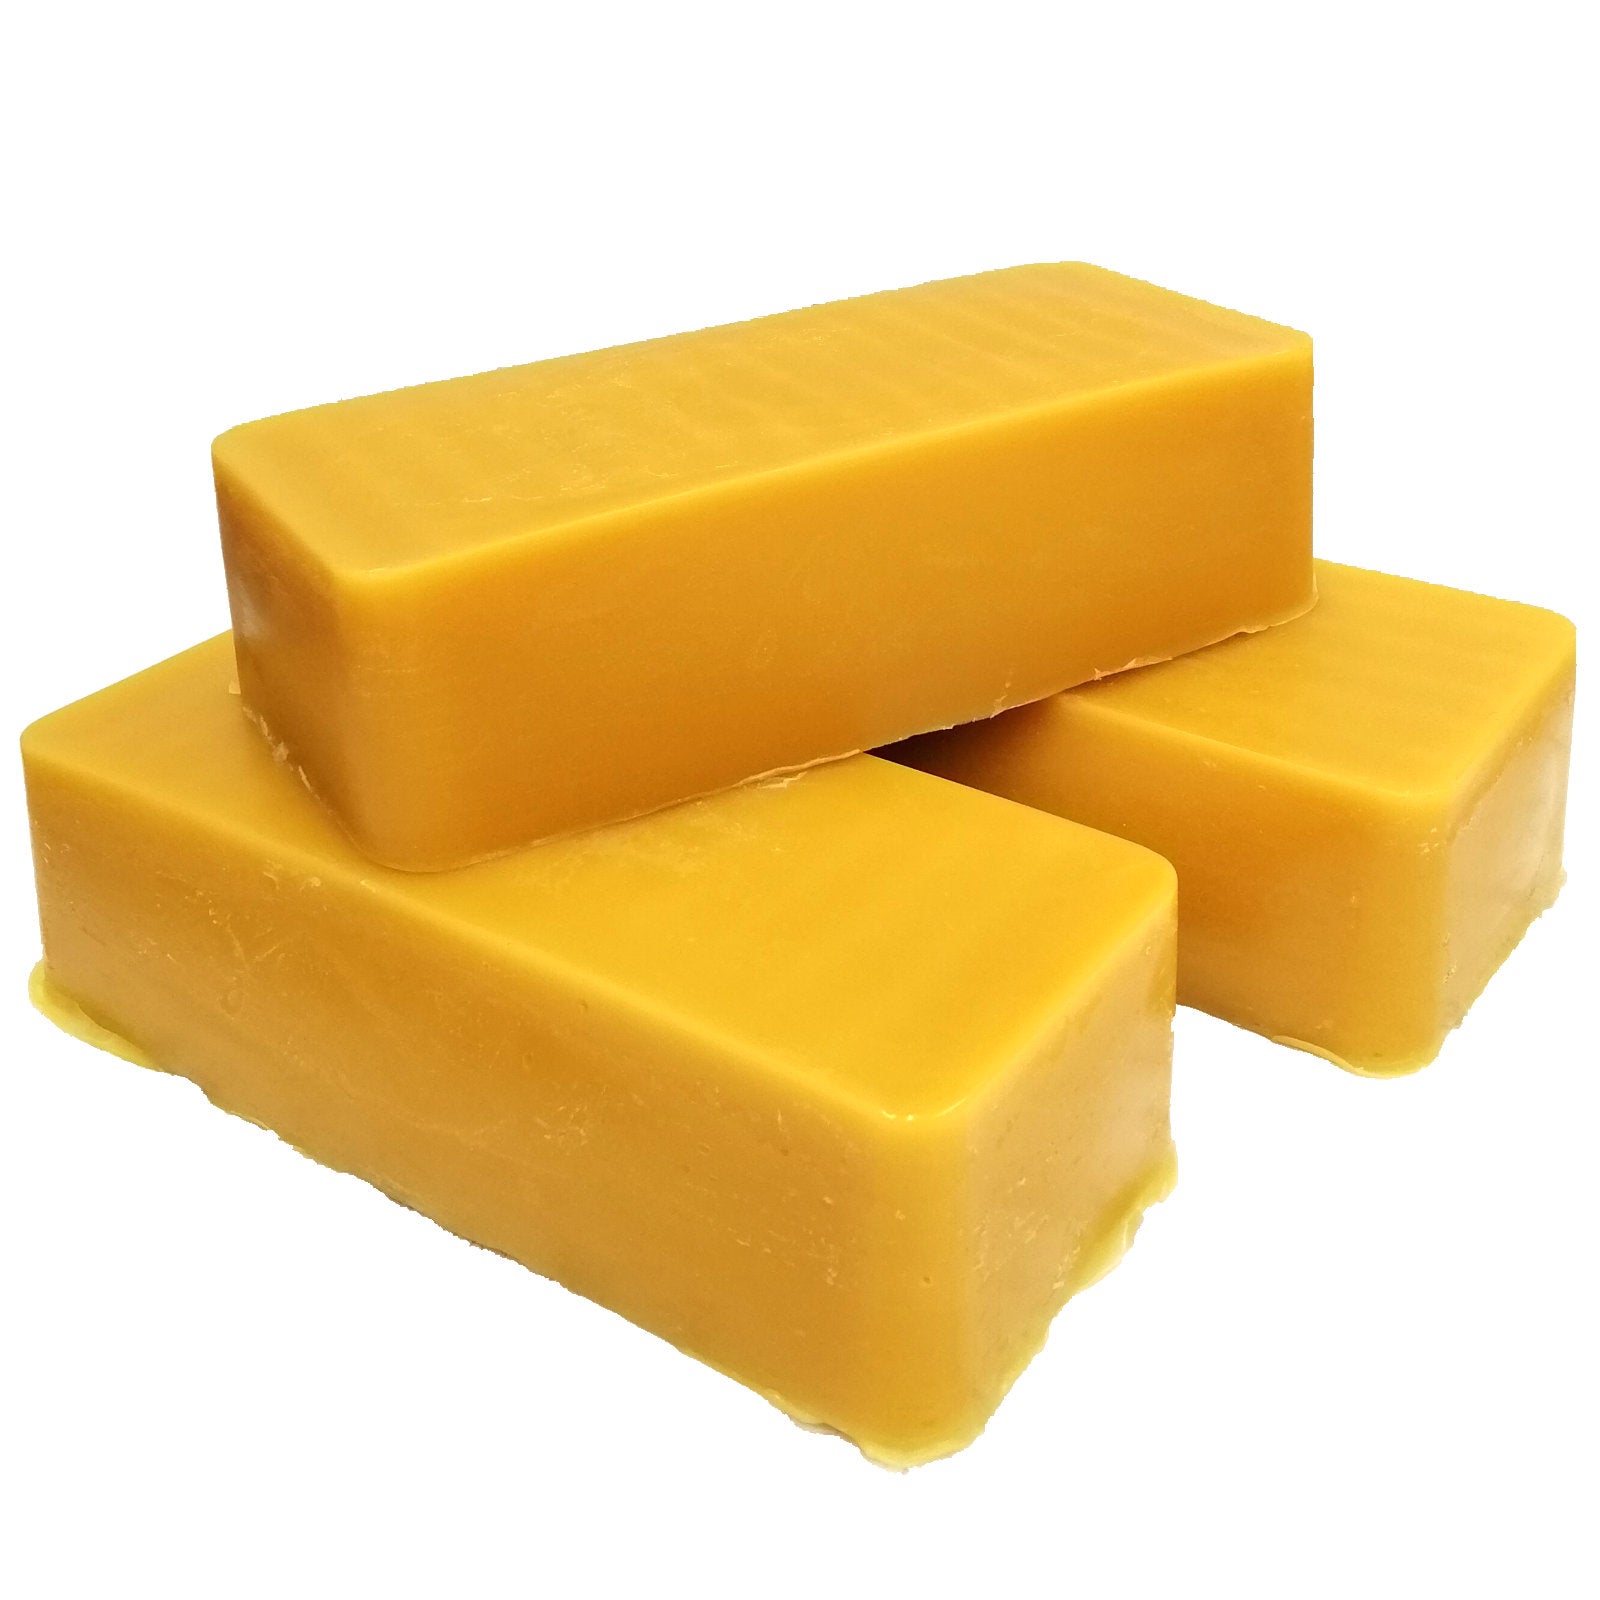 Pure 100% Australian Beeswax - 1kg food grade block for candles